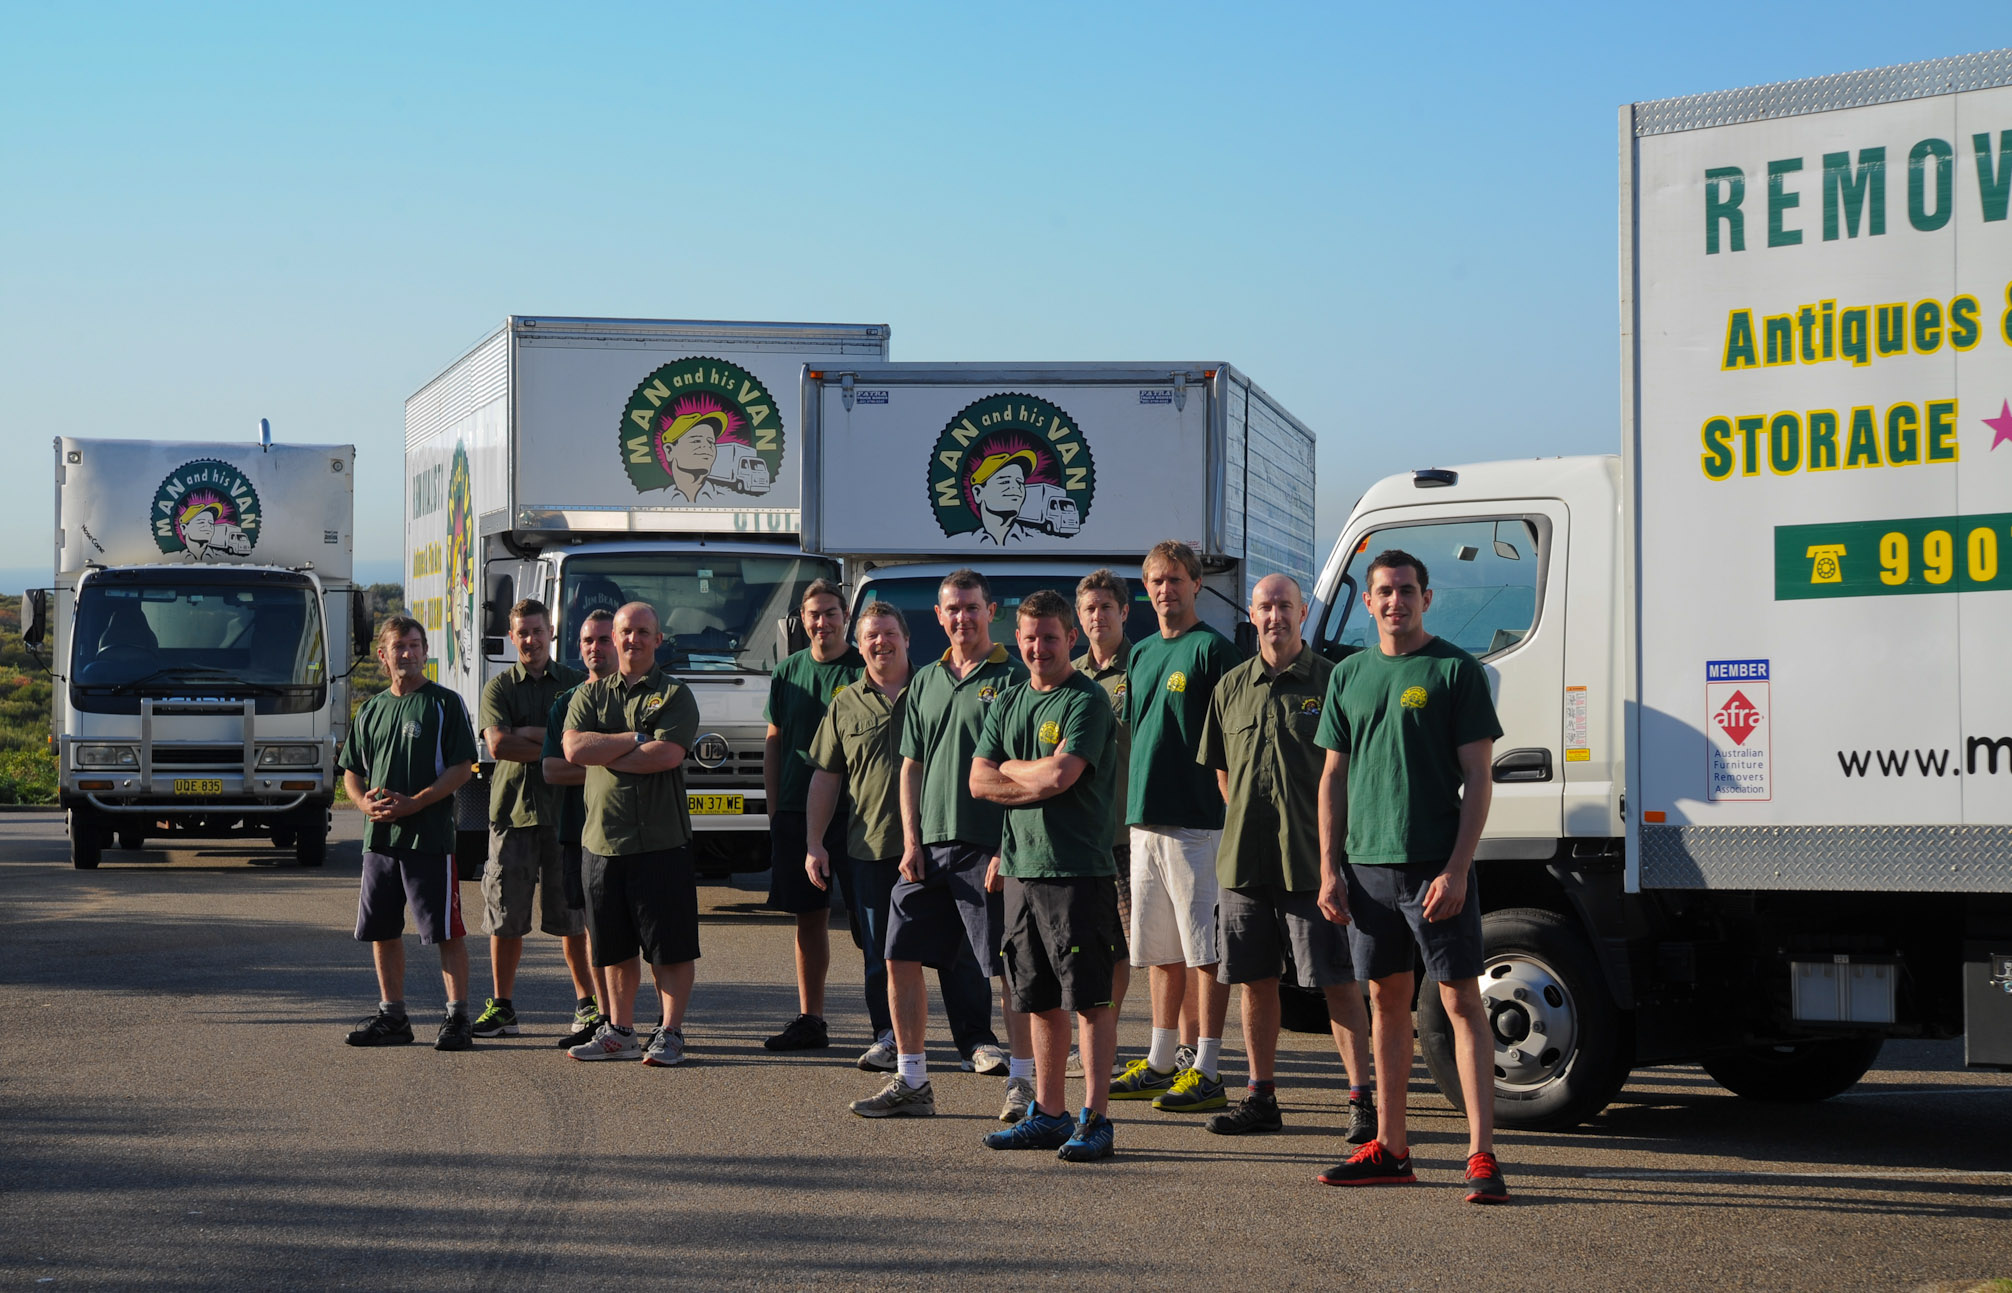 Man and His Van Removalists handle all business types and community groups